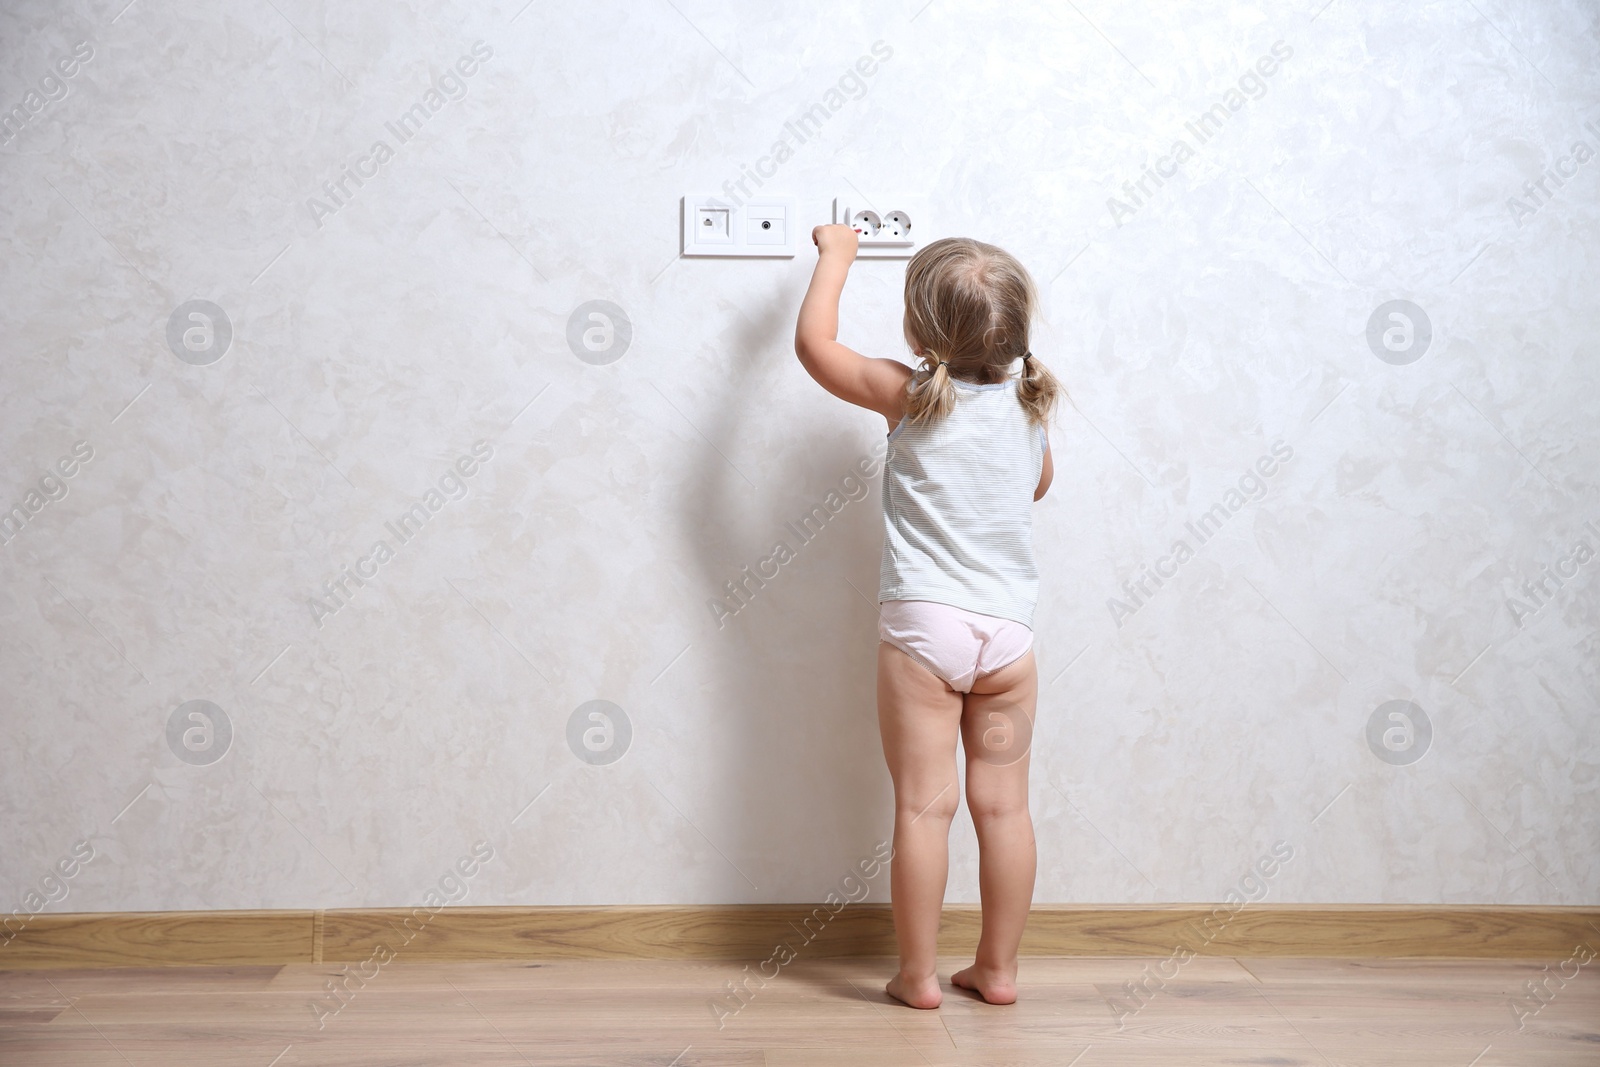 Photo of Little child playing with electrical socket indoors, back view. Dangerous situation